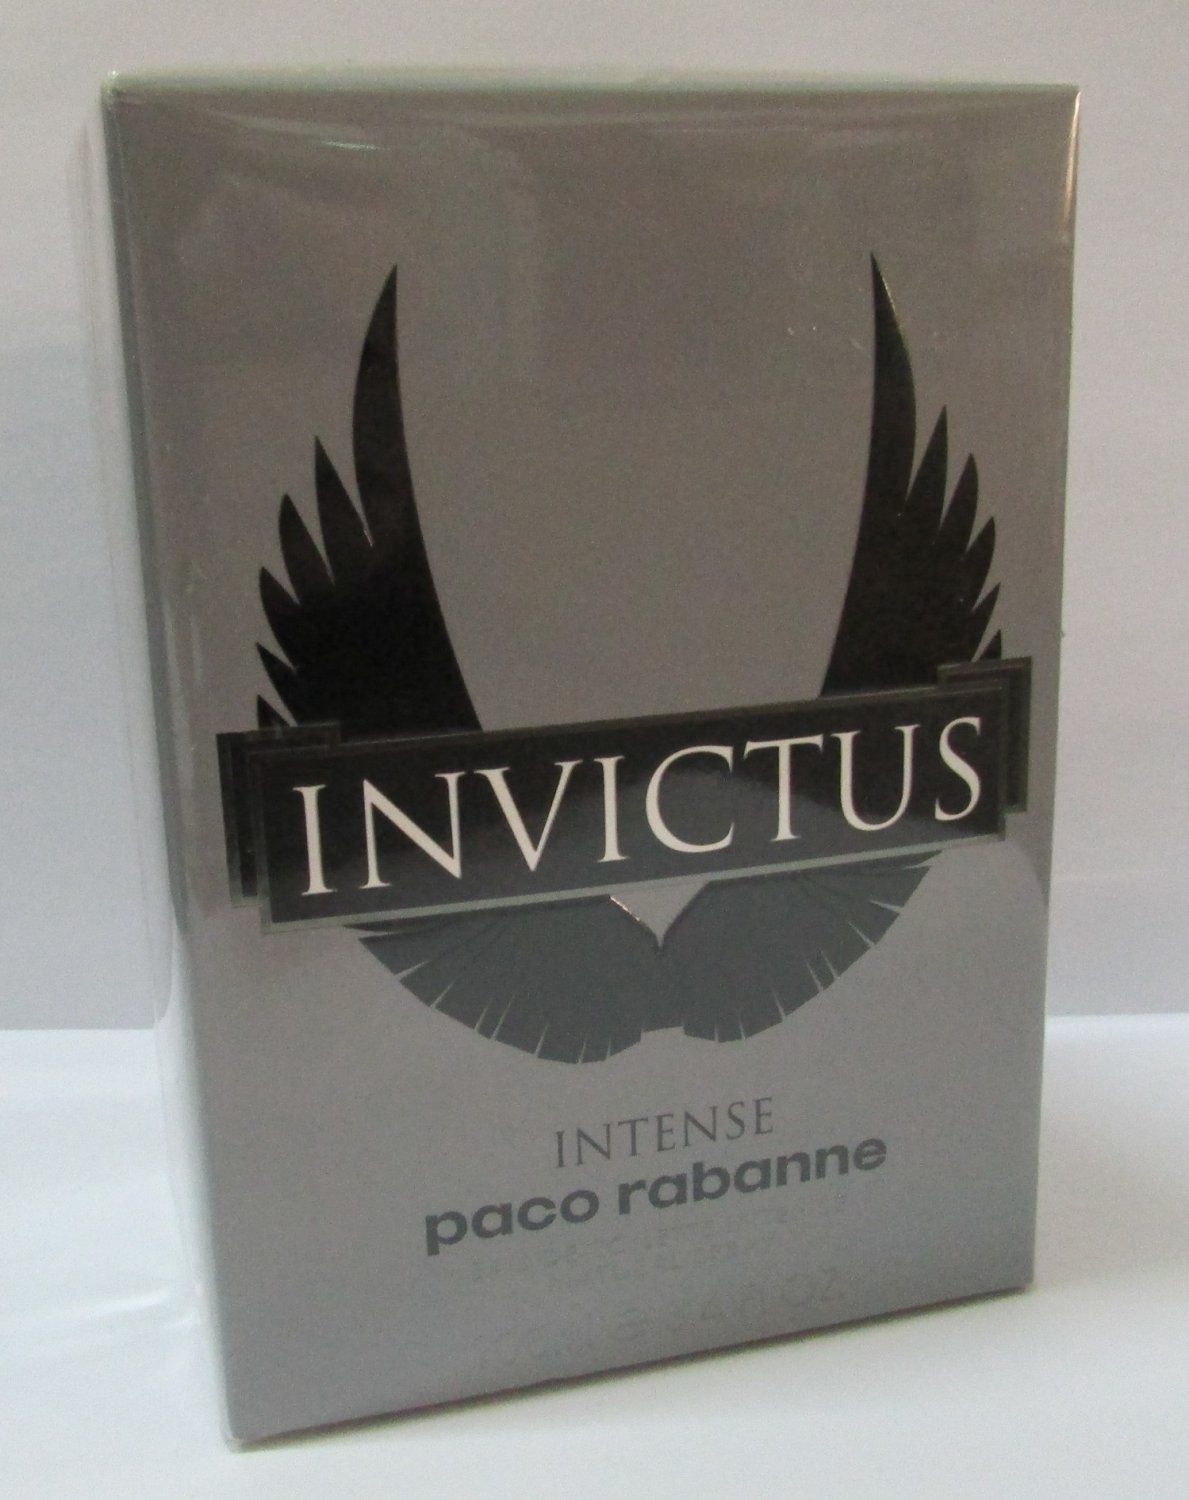 Paco Rabanne Invictus Intense EDT 100ml / 3.4oz For Men New In Sealed ...